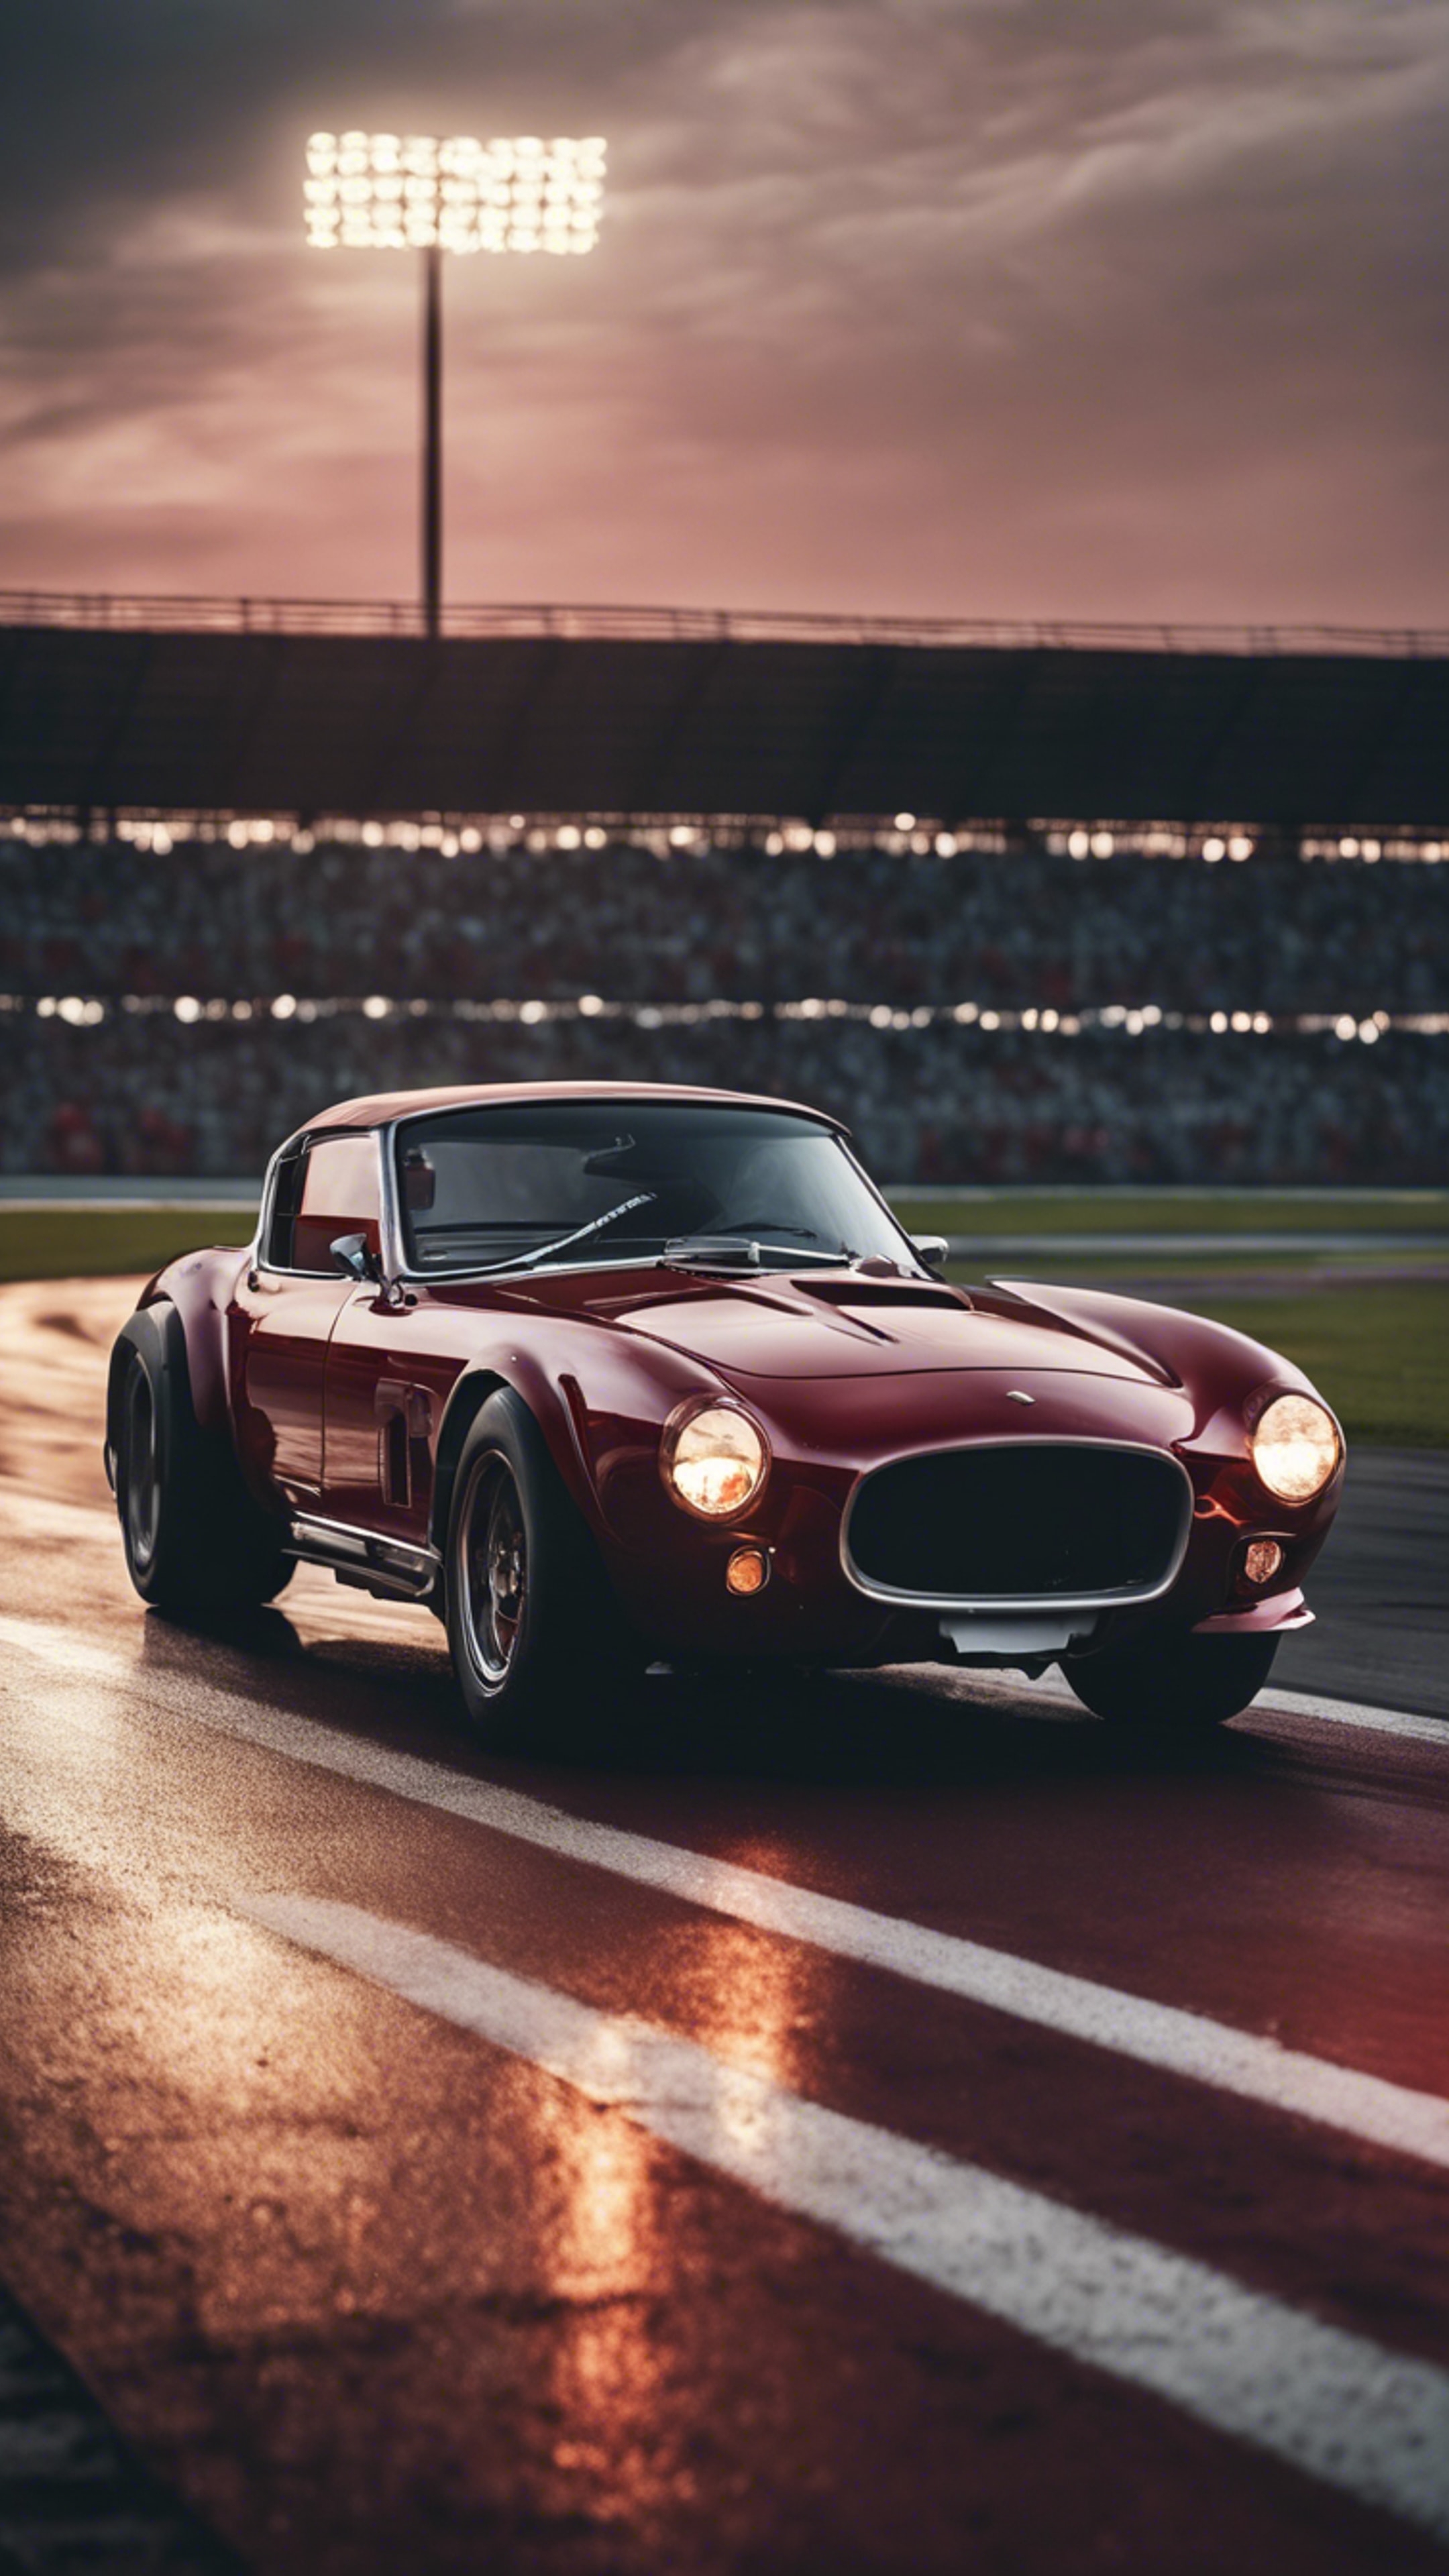 A richly toned dark red sports car racing on a track under the evening sky. Tapéta[f7c86e5103c94fca80ae]